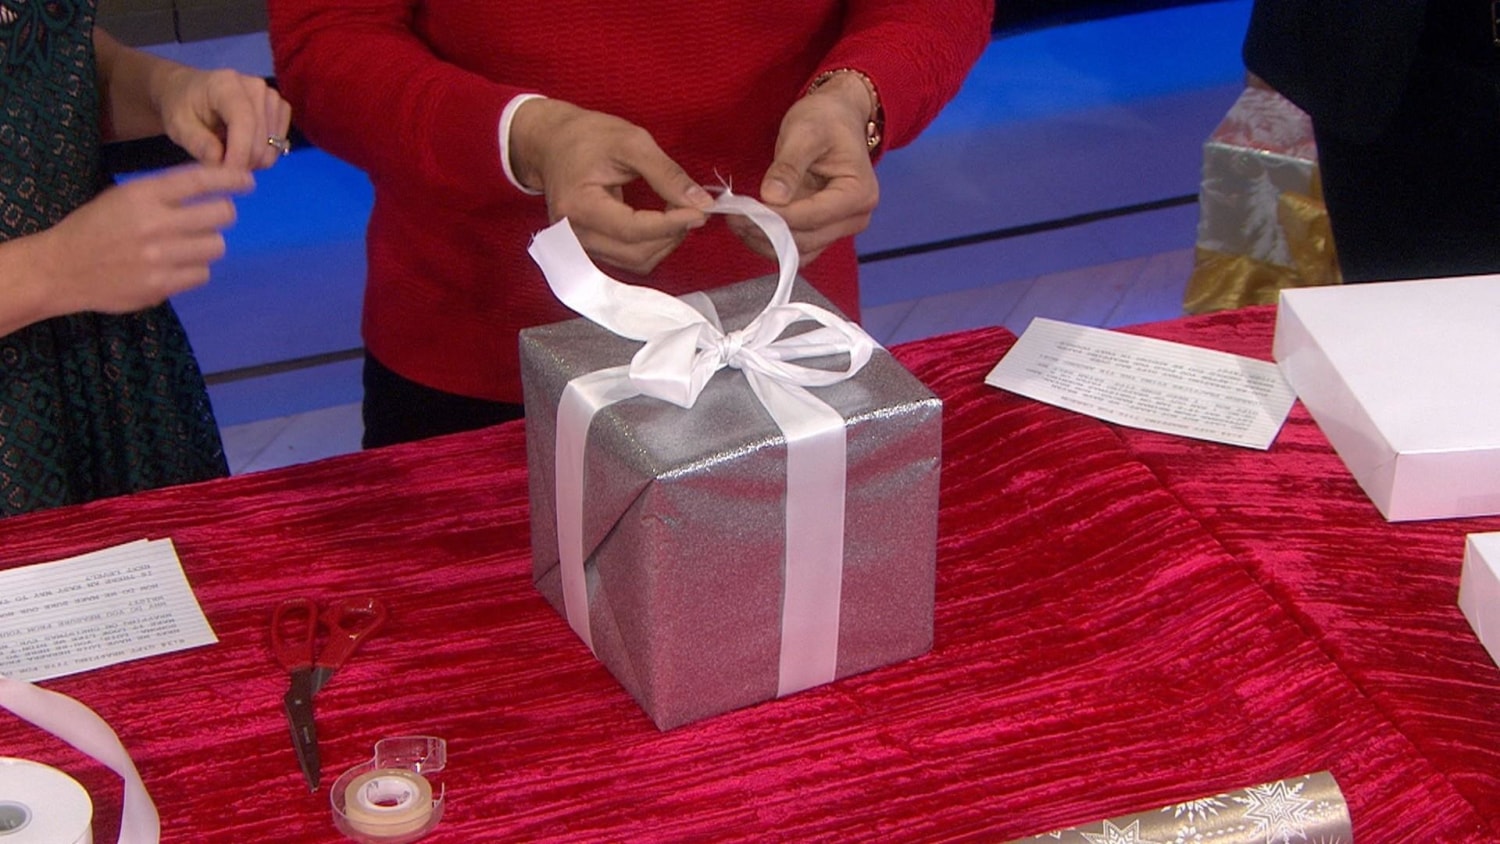 Waterstones shares viral gift wrapping hack on Twitter